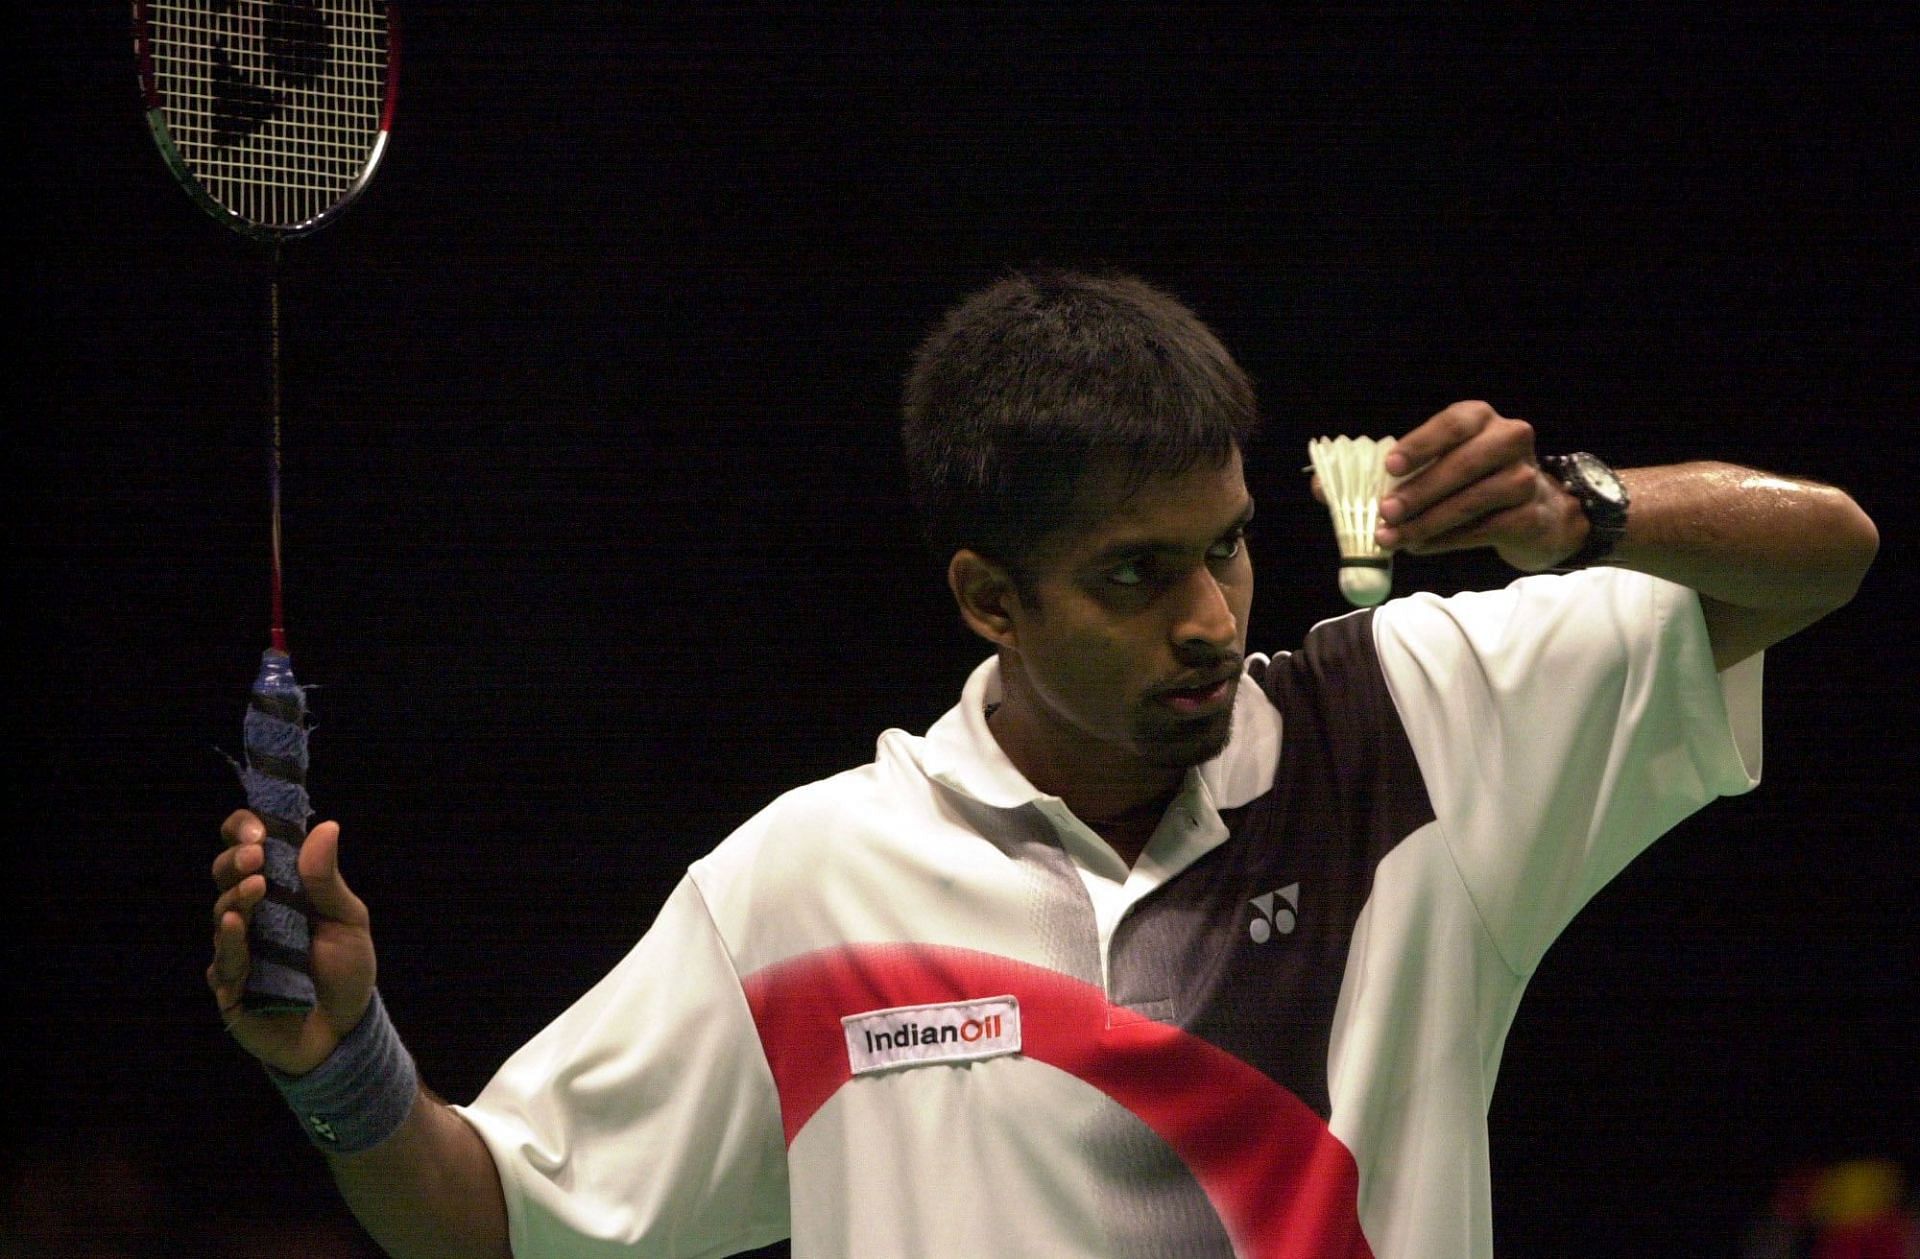 Pullela Gopichand in action at the Yonex All England Badminton (Image credits: Getty Images)